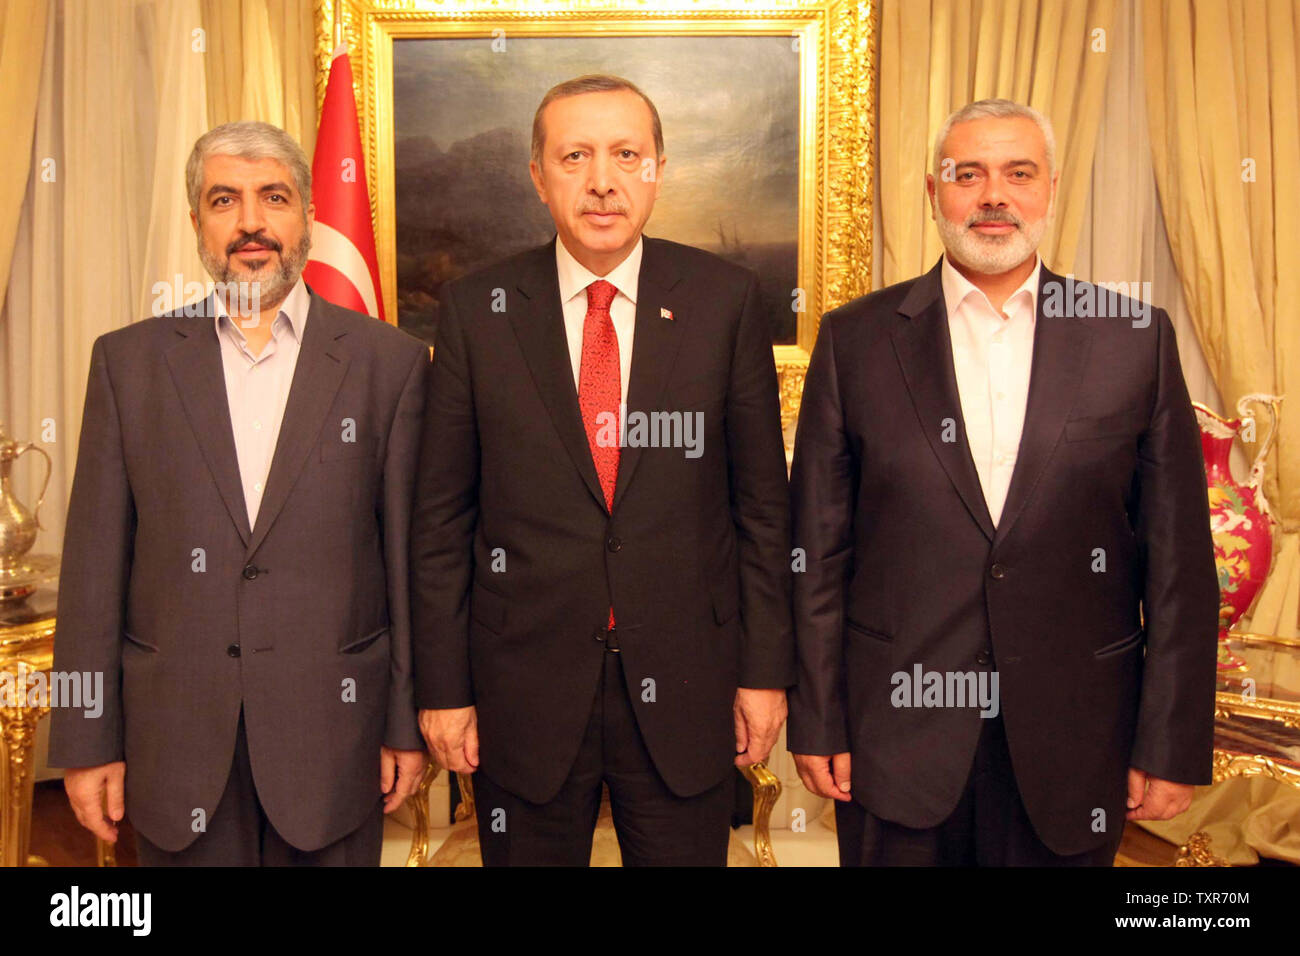 urkish Prime Minister Recep Tayyip Erdogan (C) meets Khalid Mashaal (L), the Hamas chief in exile, and Gaza’s prime minister Ismail Haniyeh in Ankara, Turkey  on June 18, 2013. Senior leaders Hamas met today in Ankara with Erdogan to discuss Erdogan's planned visit to the Gaza Strip as well as the situation in Syria, the source said on condition of anonymity.    UPI/Palestinian PM Media Stock Photo